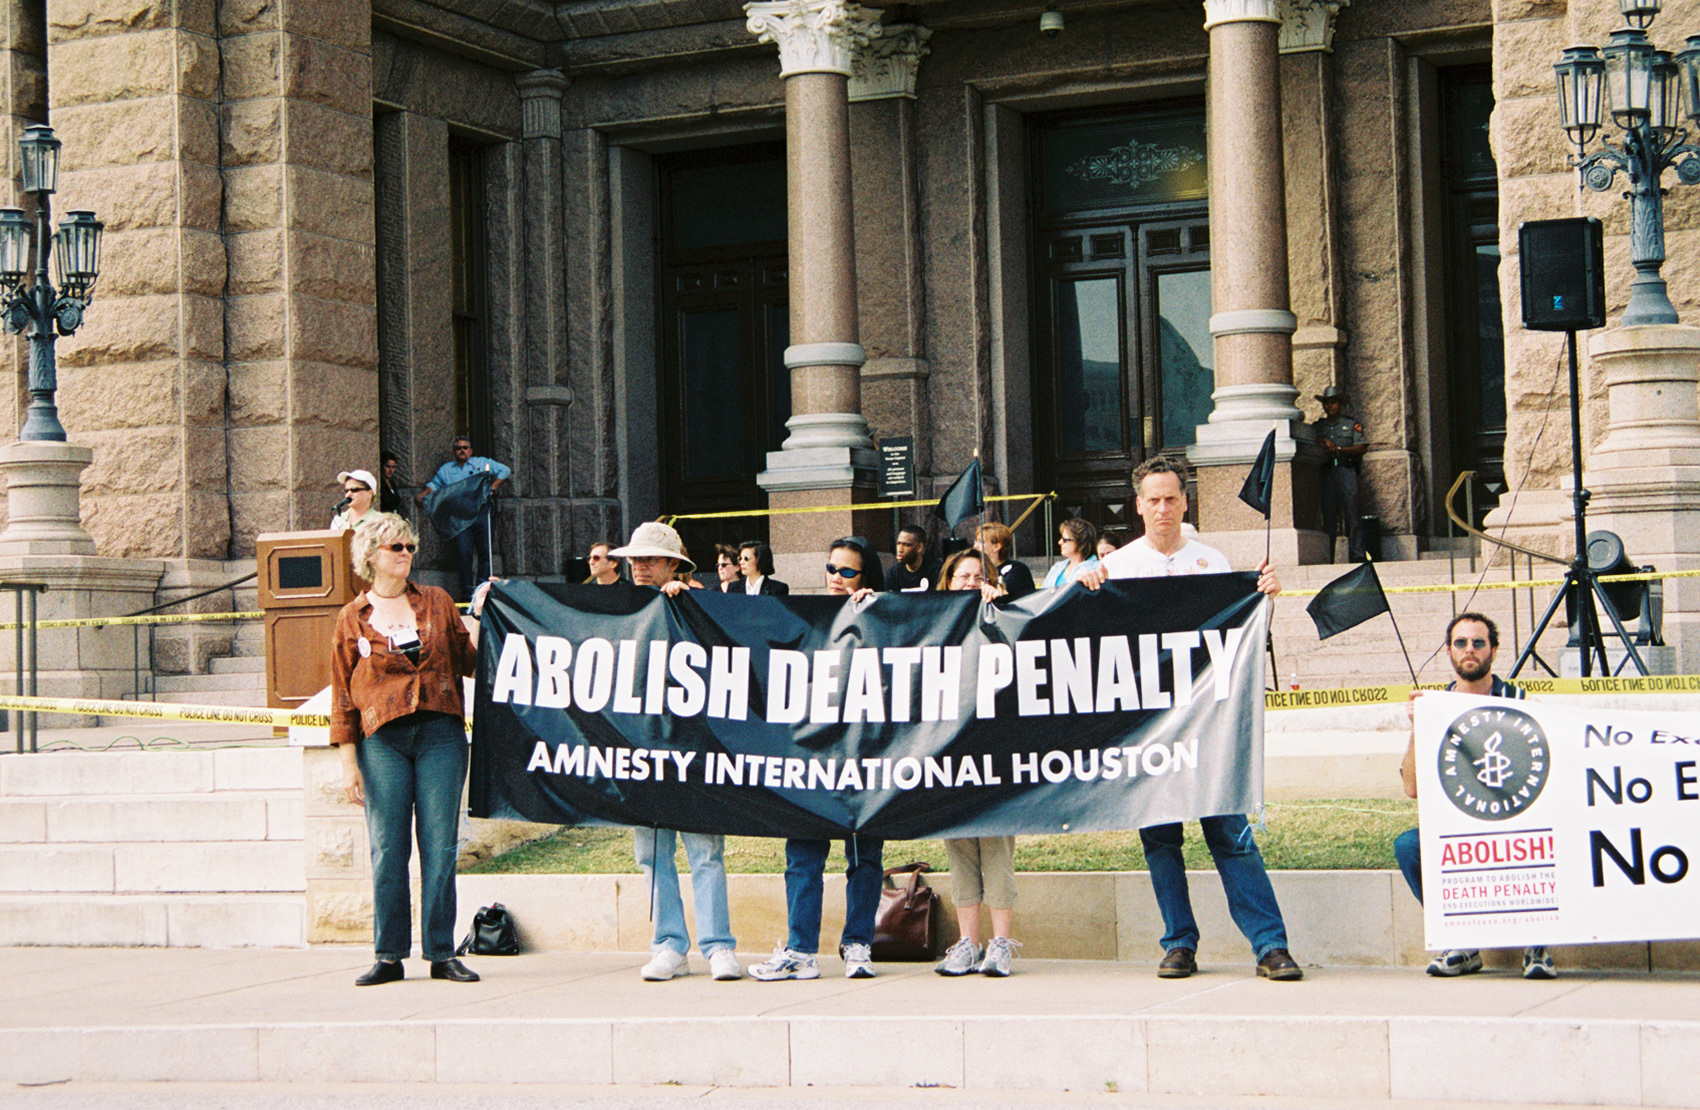 Rally to abolish the death penalty